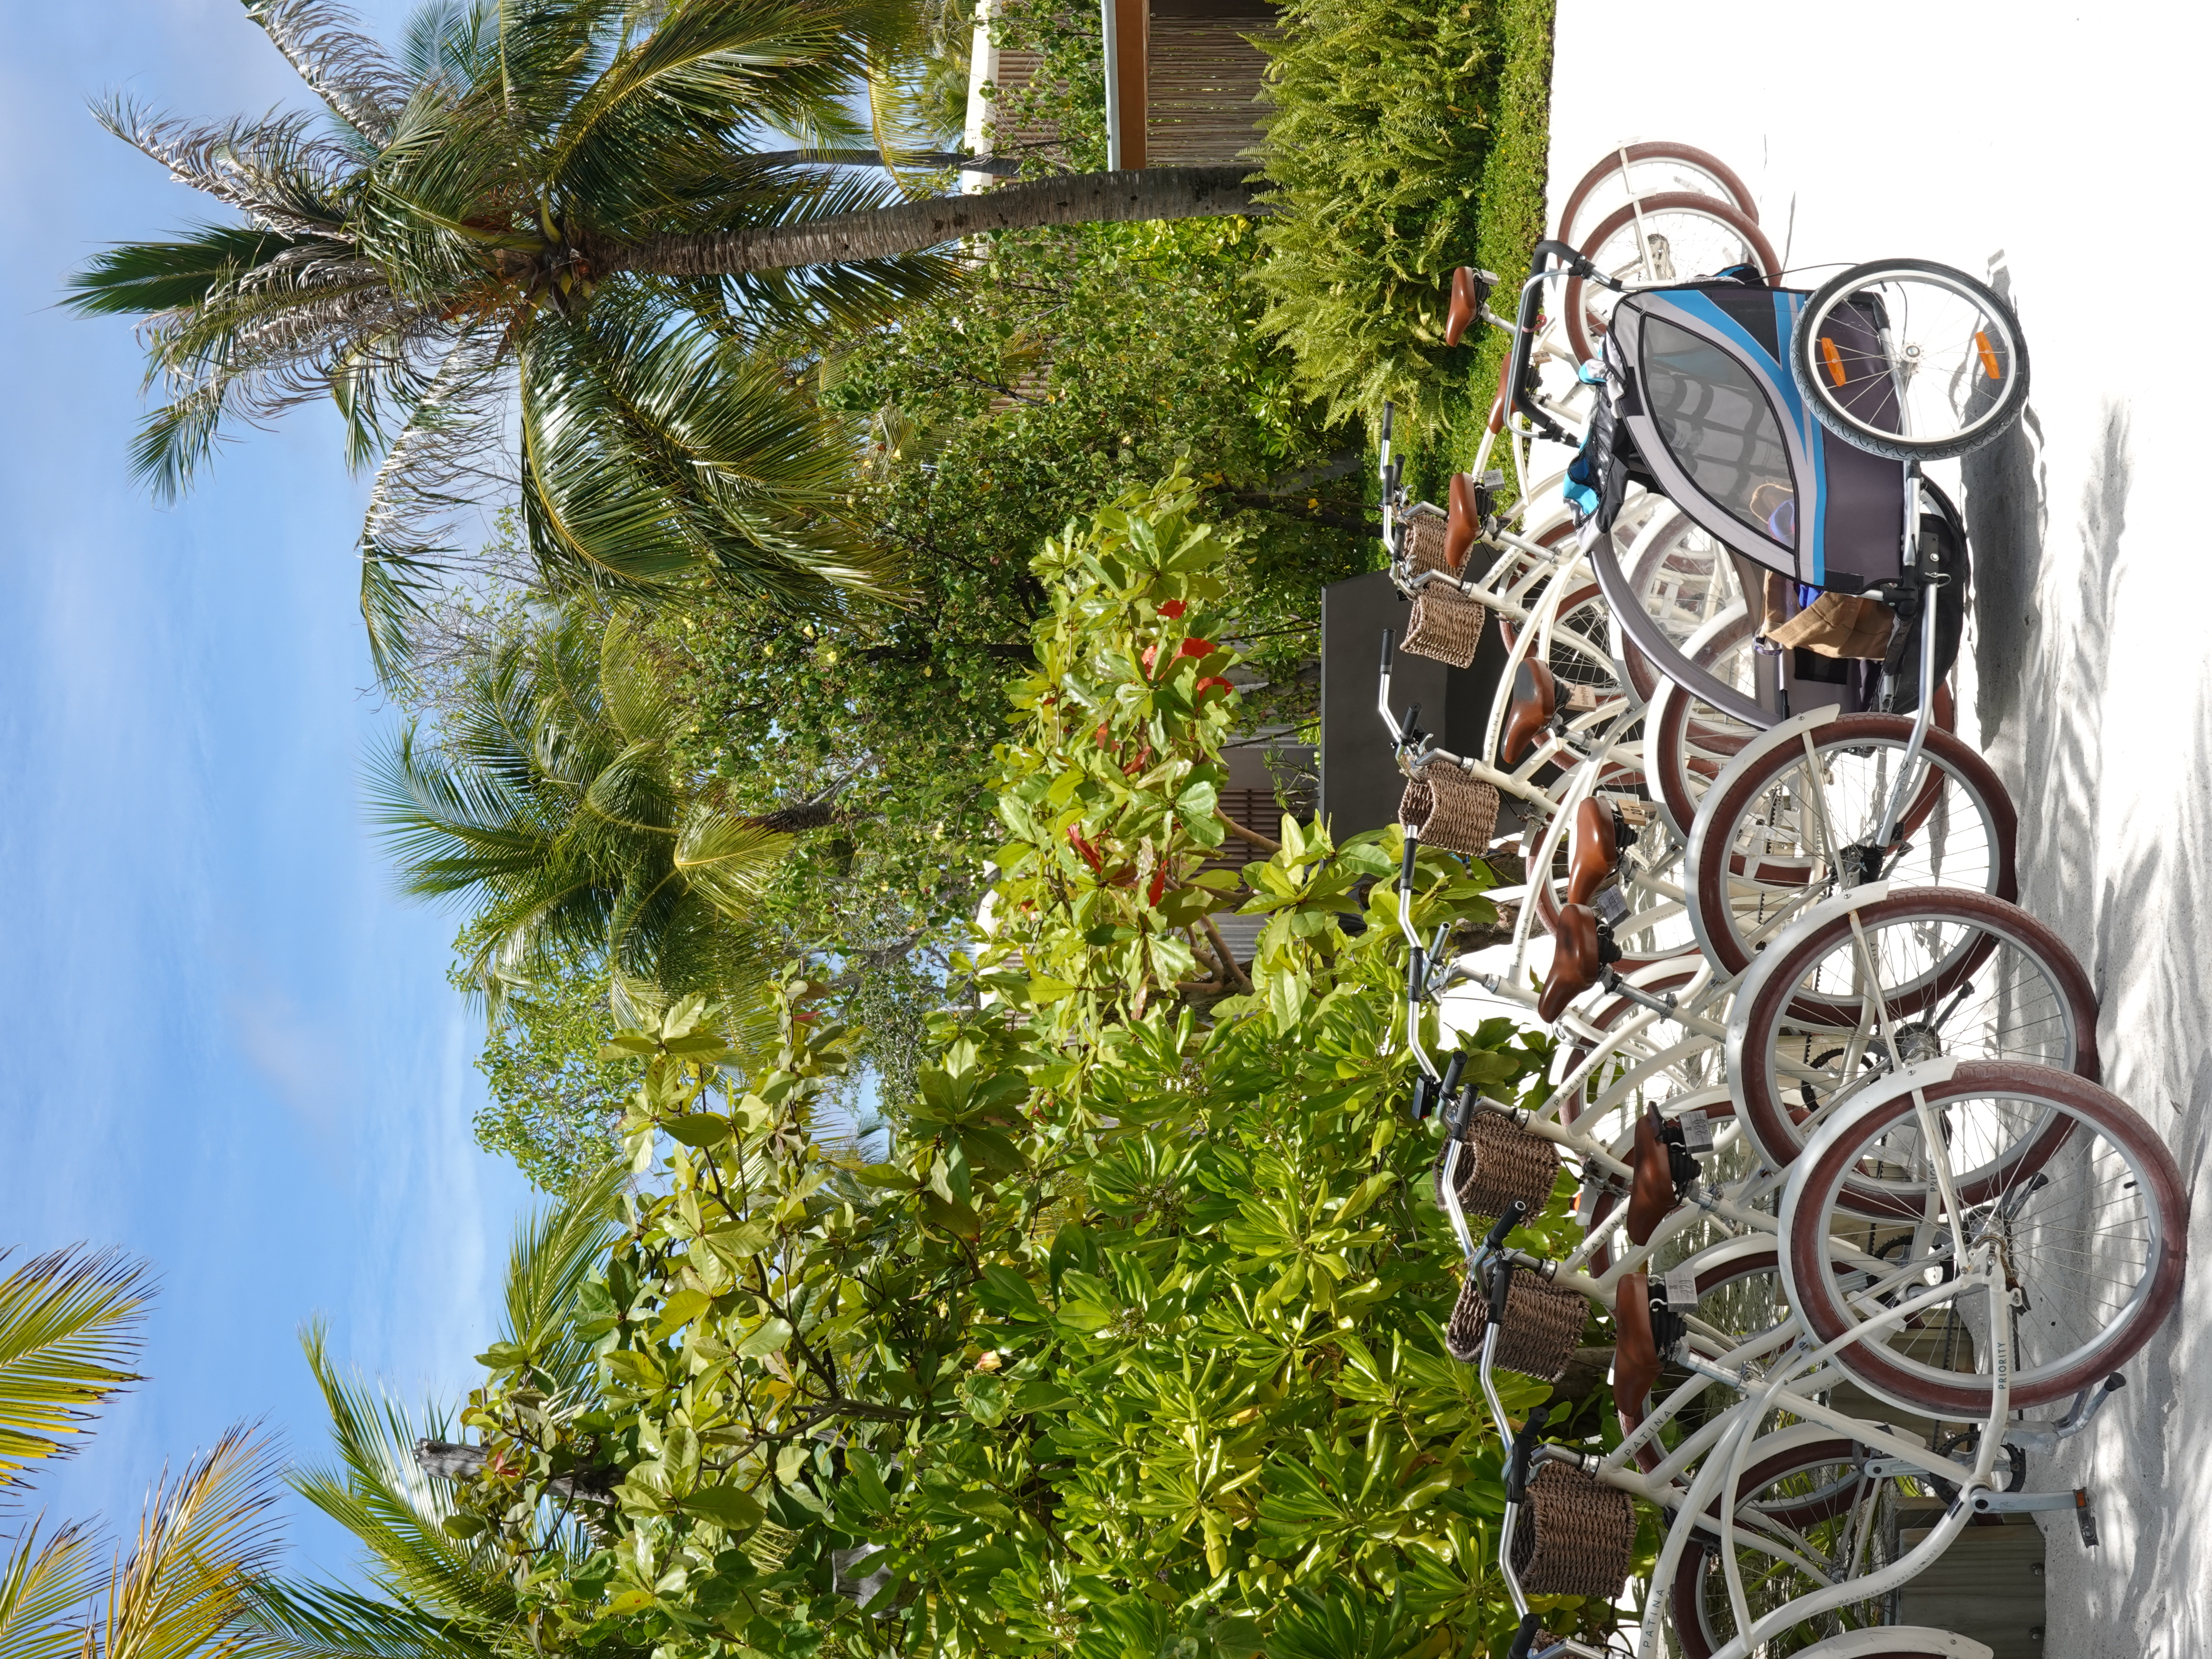 Family-friendly option to move around the island - the buggy bike at Patina, Maldives.